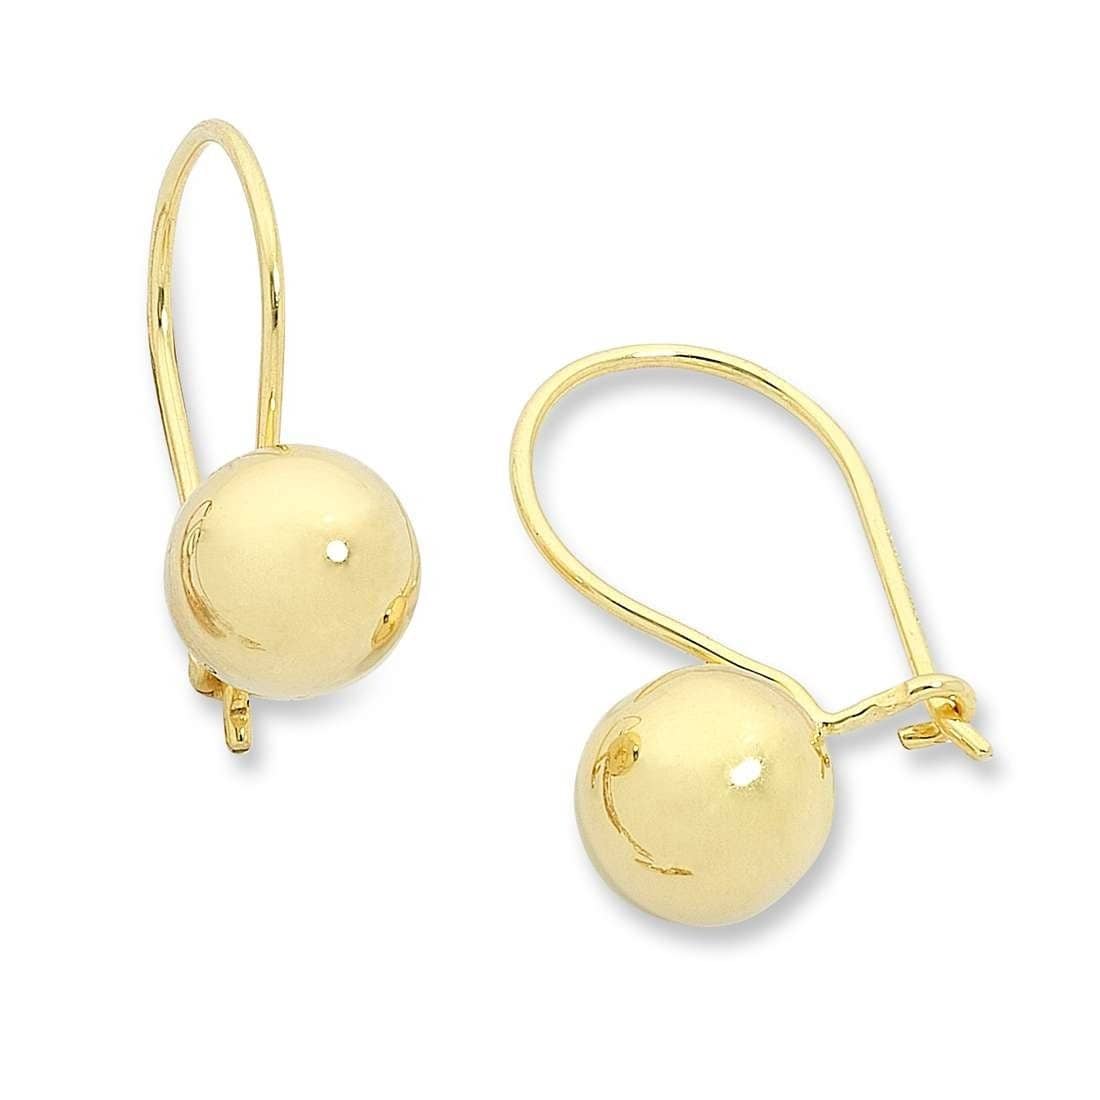 9ct Yellow Gold Silver Infused Euro Ball Earrings 6mm Earrings Bevilles 